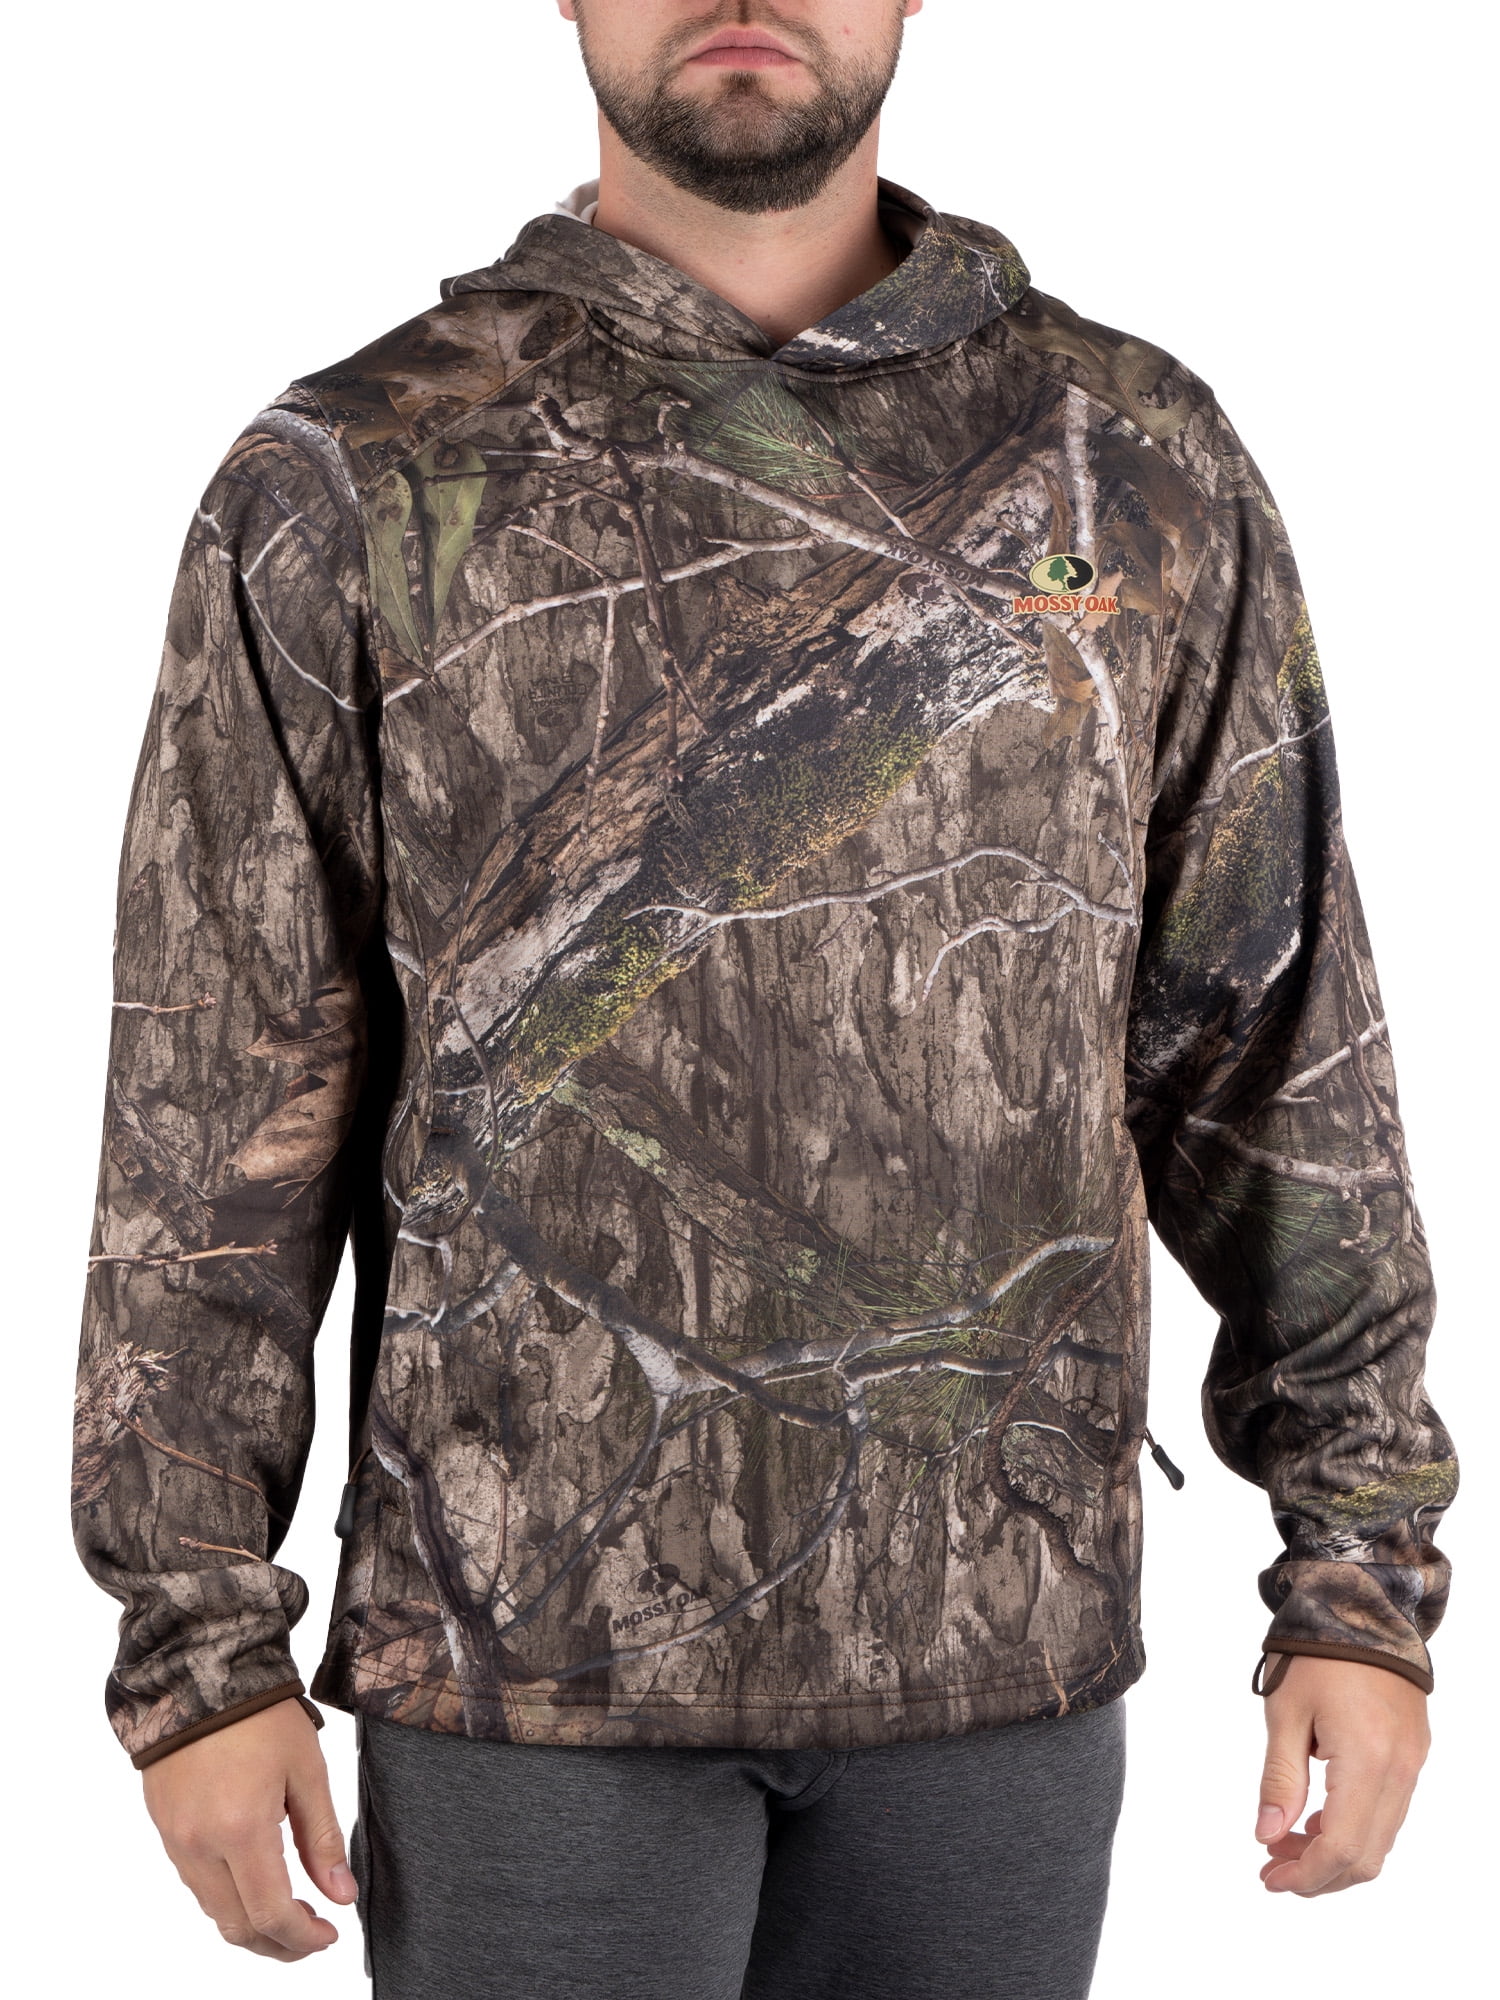 Duramax Mossy Oak Pullover Hoodie for Sale by Robjohnsilvers